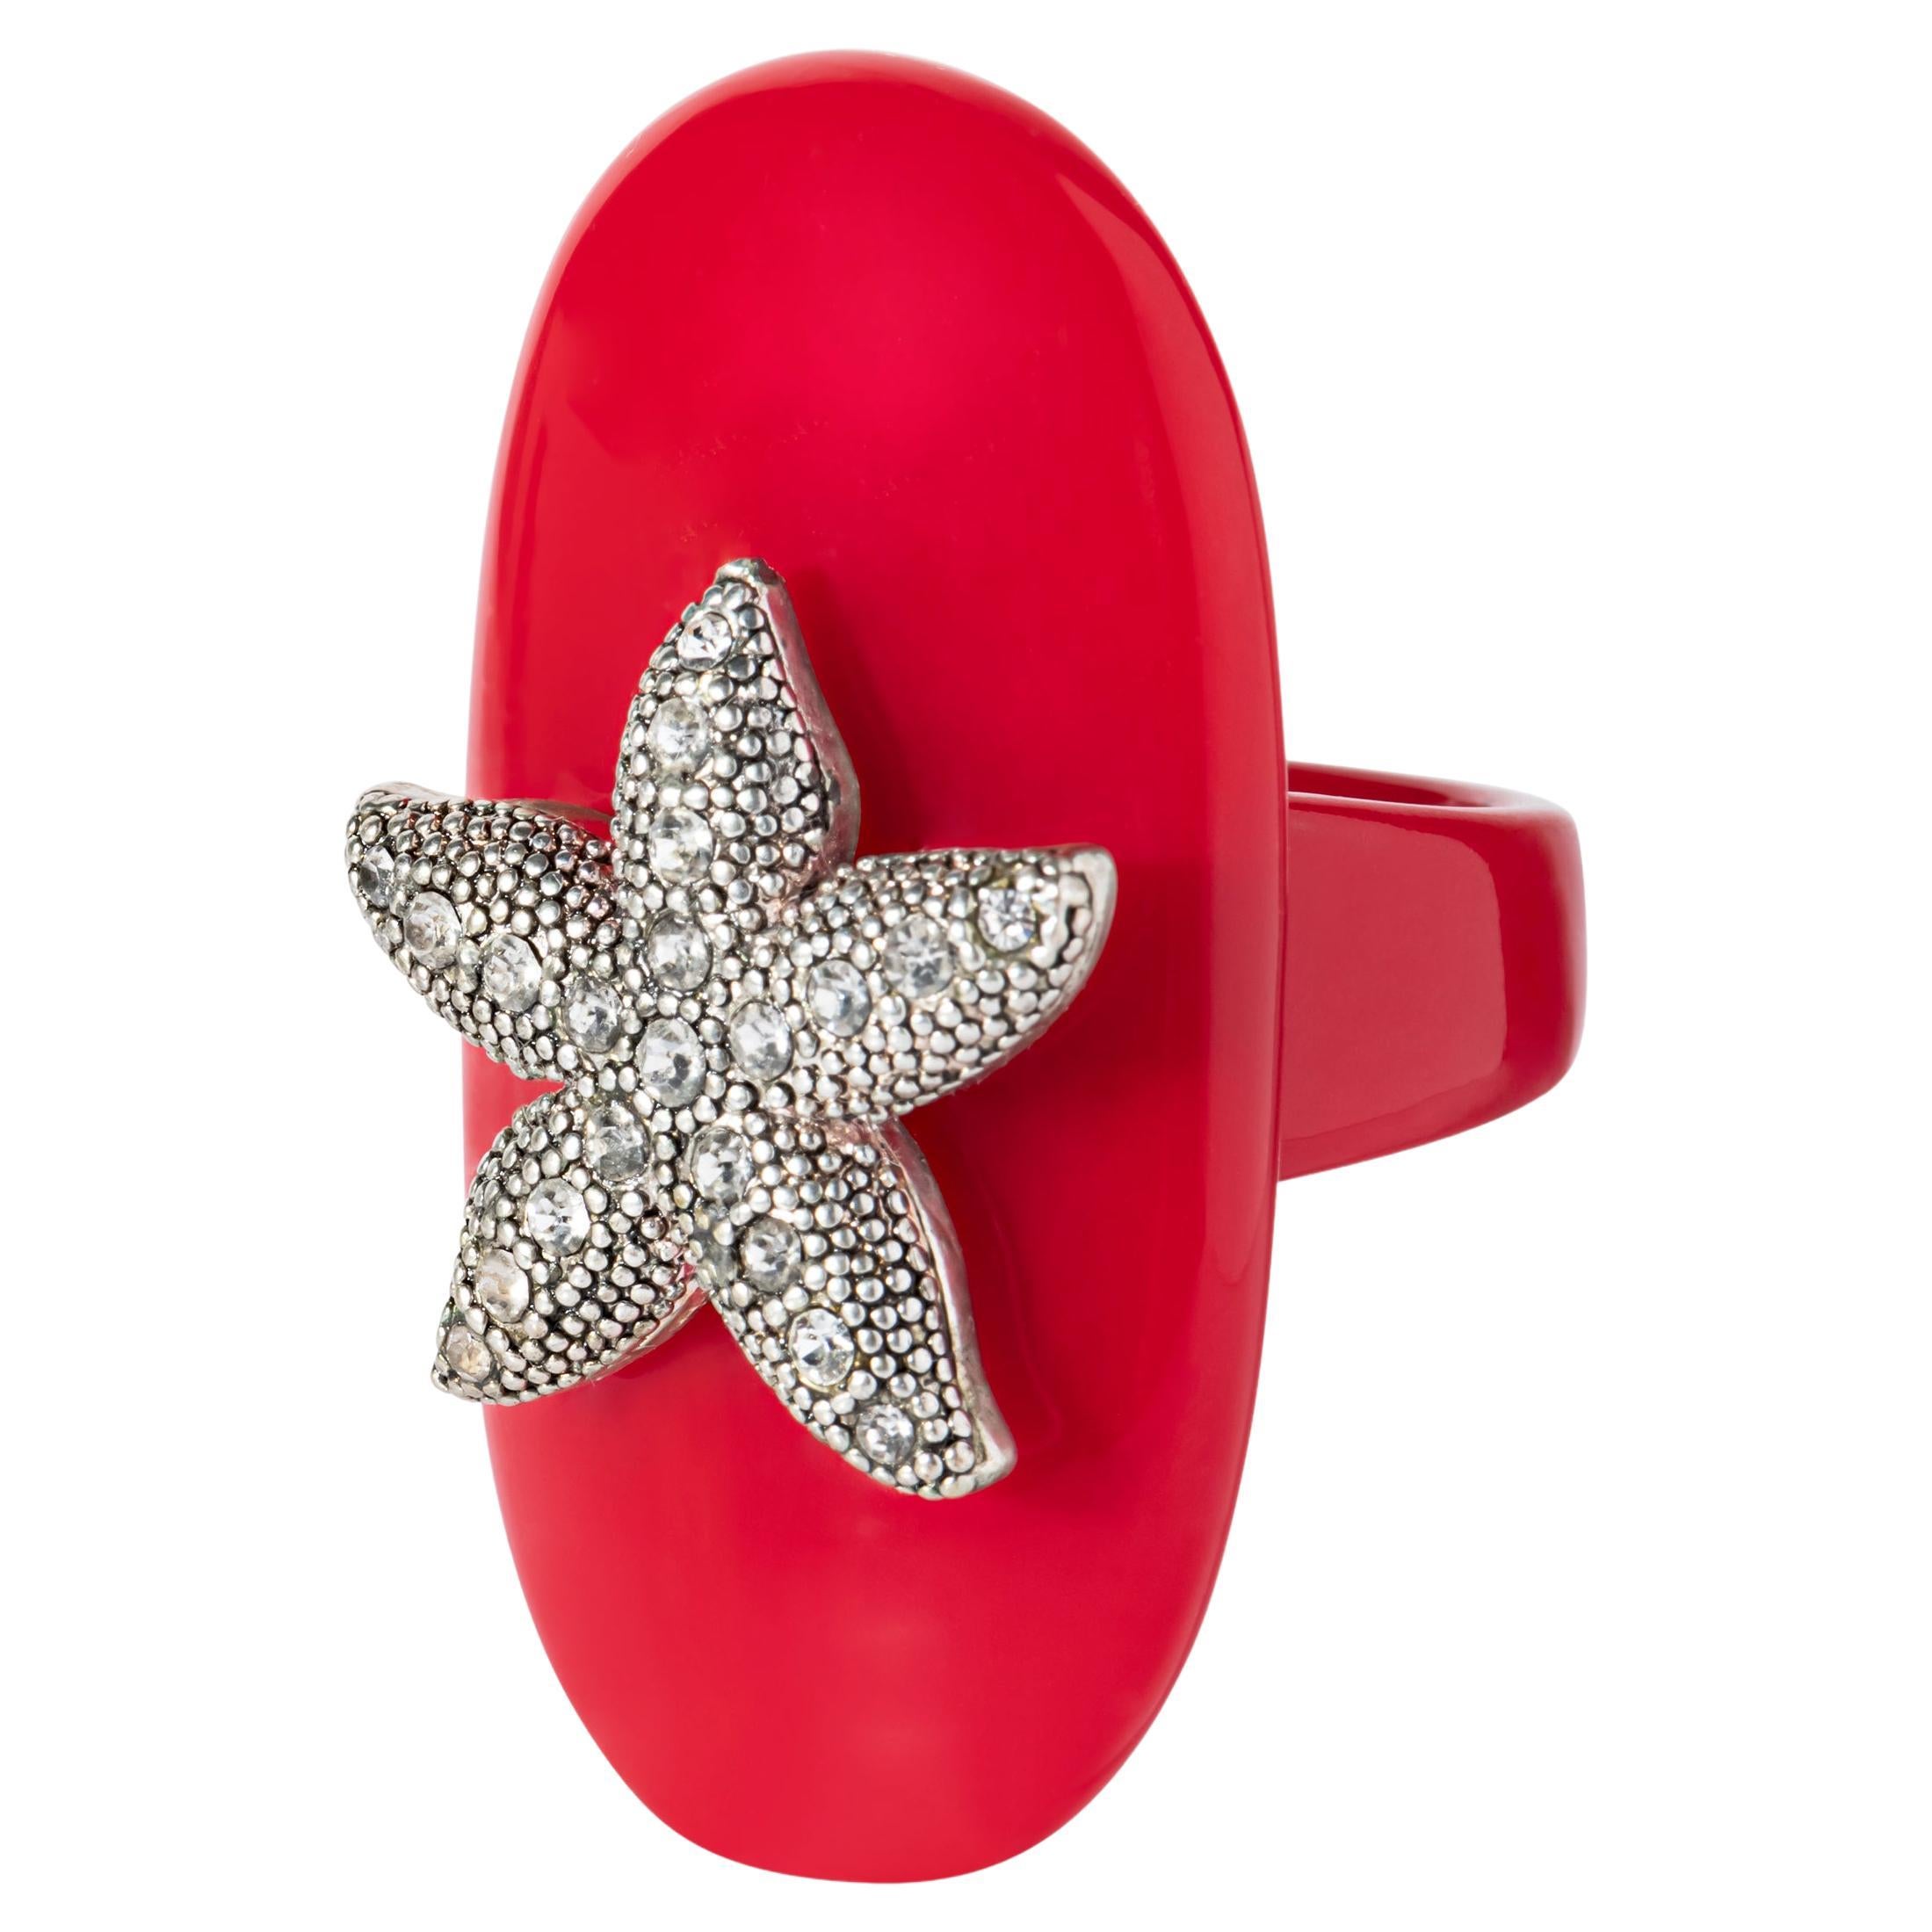 Bochic “Ikon” Red Star Fish Bijoux Ring 70s style  For Sale